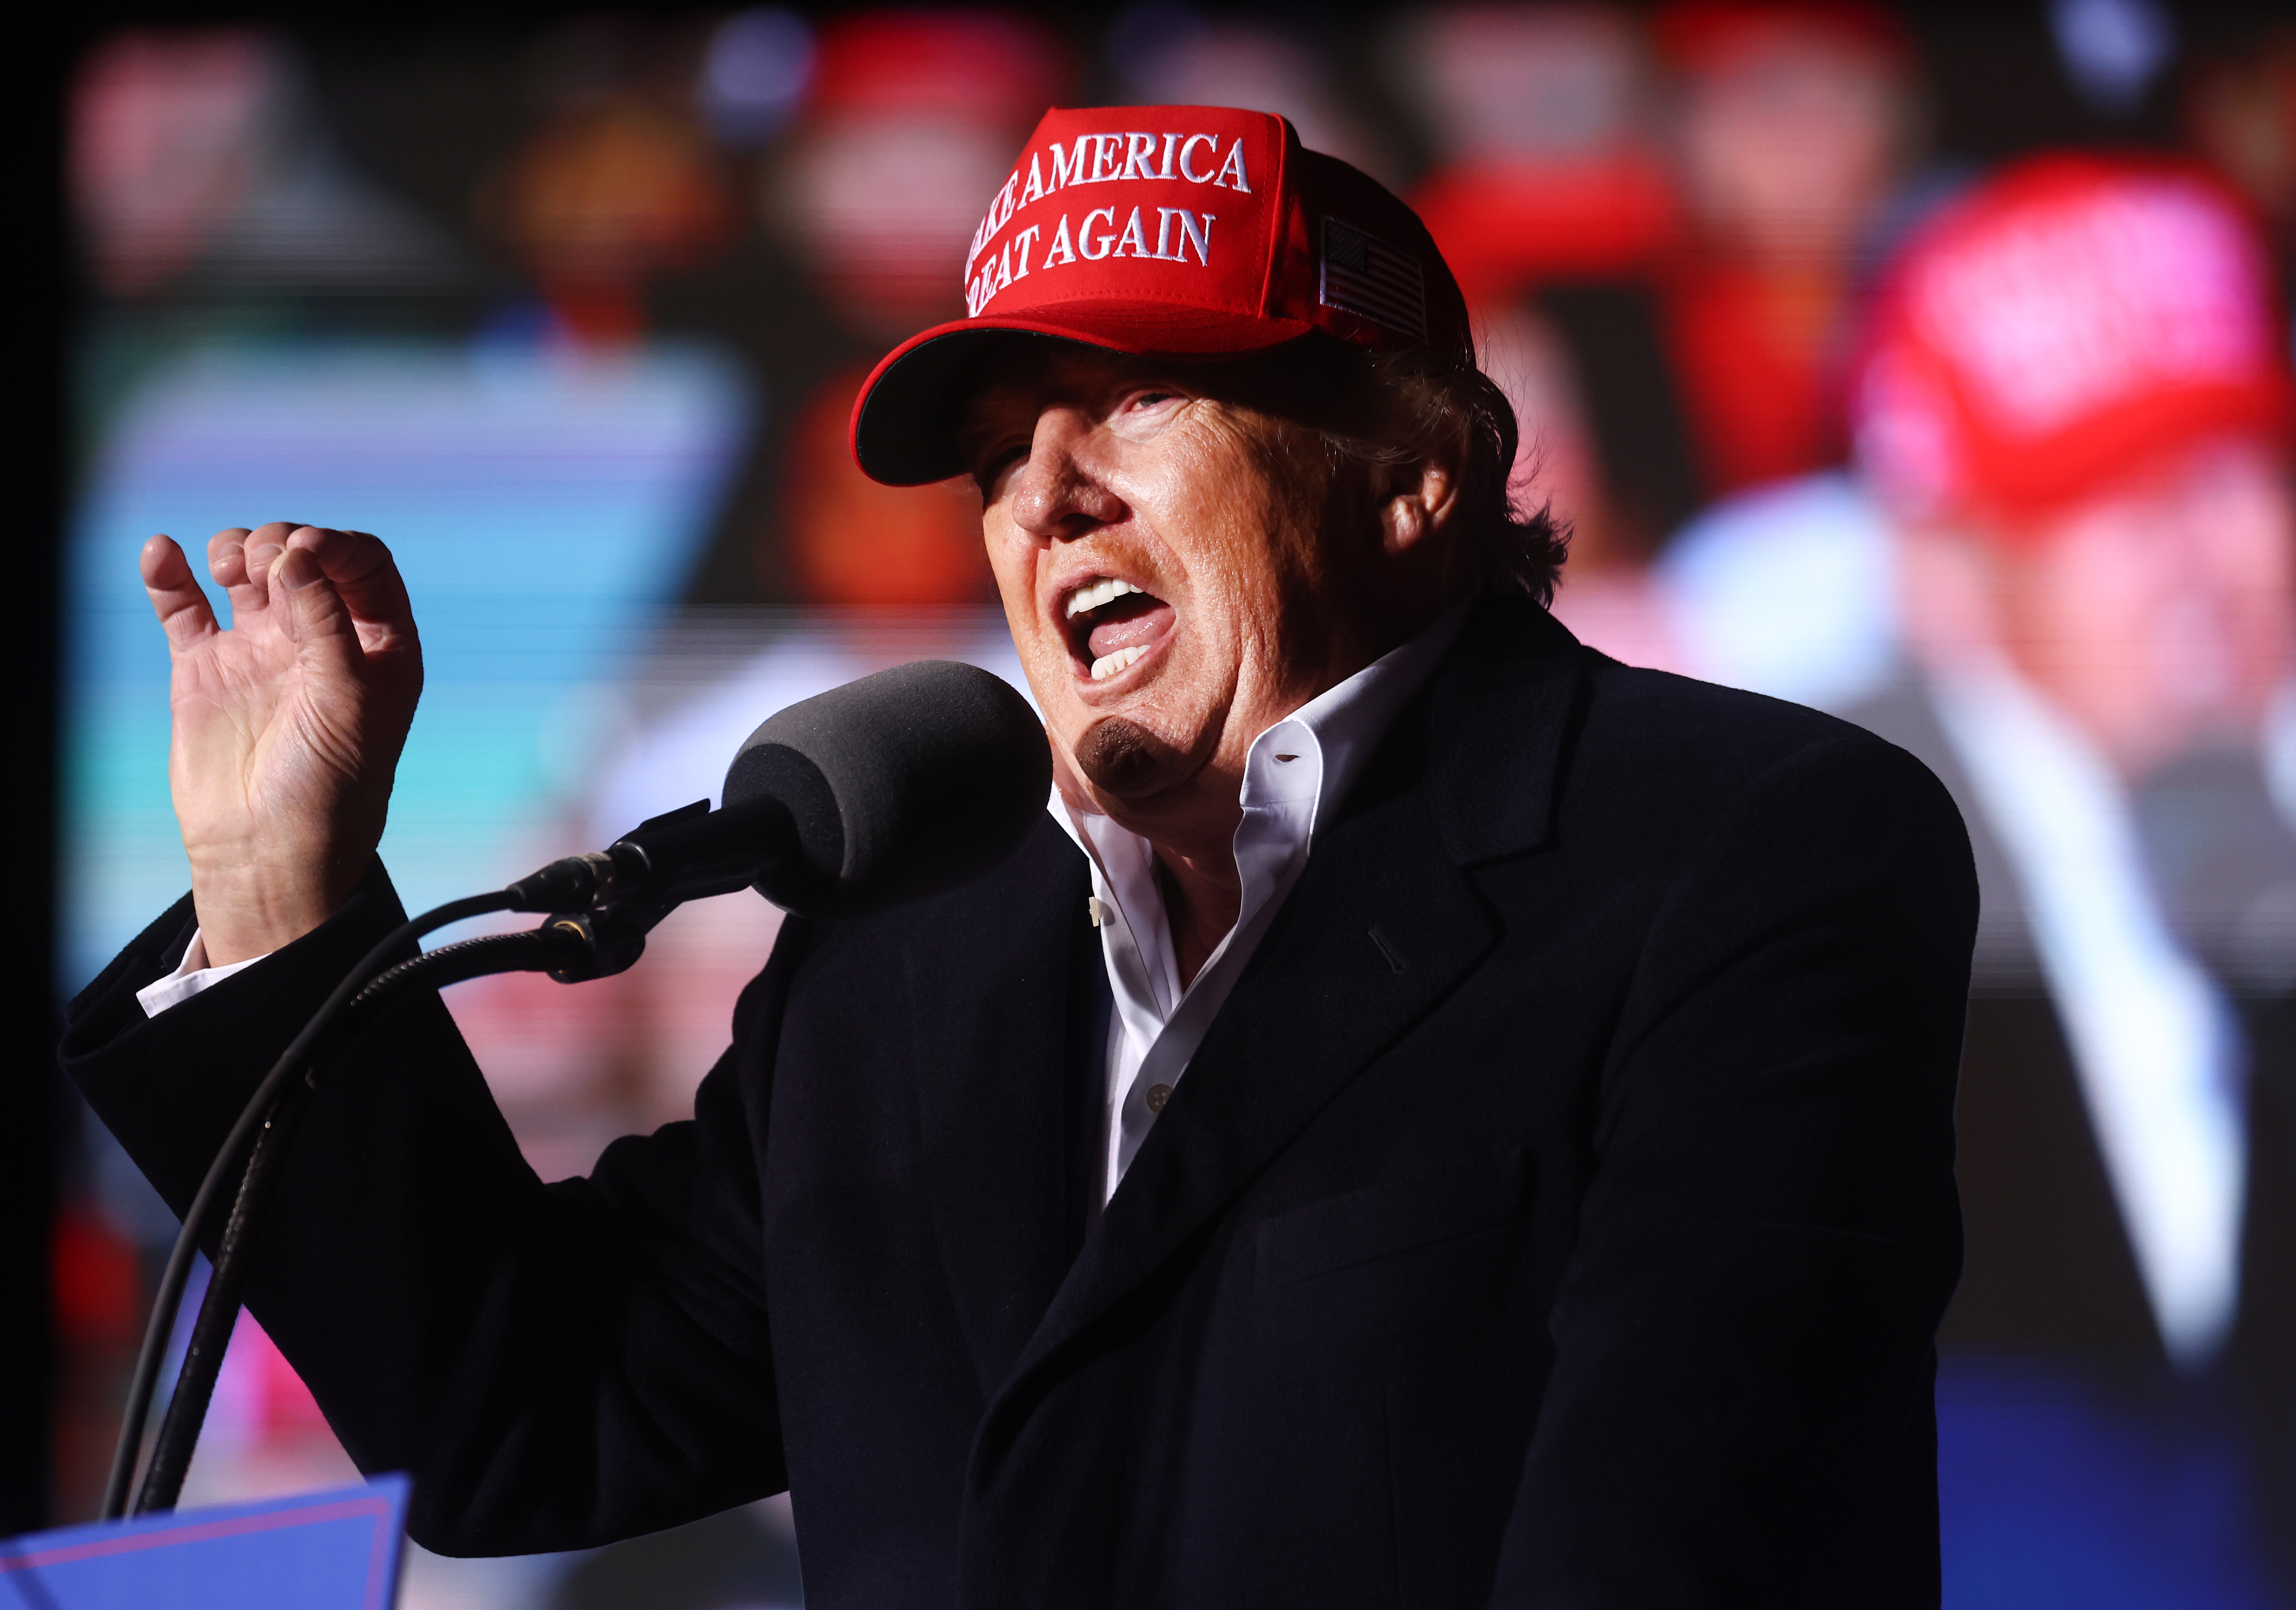 Former President Donald Trump, wearing a red Make America Great Again hat, gestures from behind a microphone on stage at a rally in Florence, Arizona, on January 15, 2022.